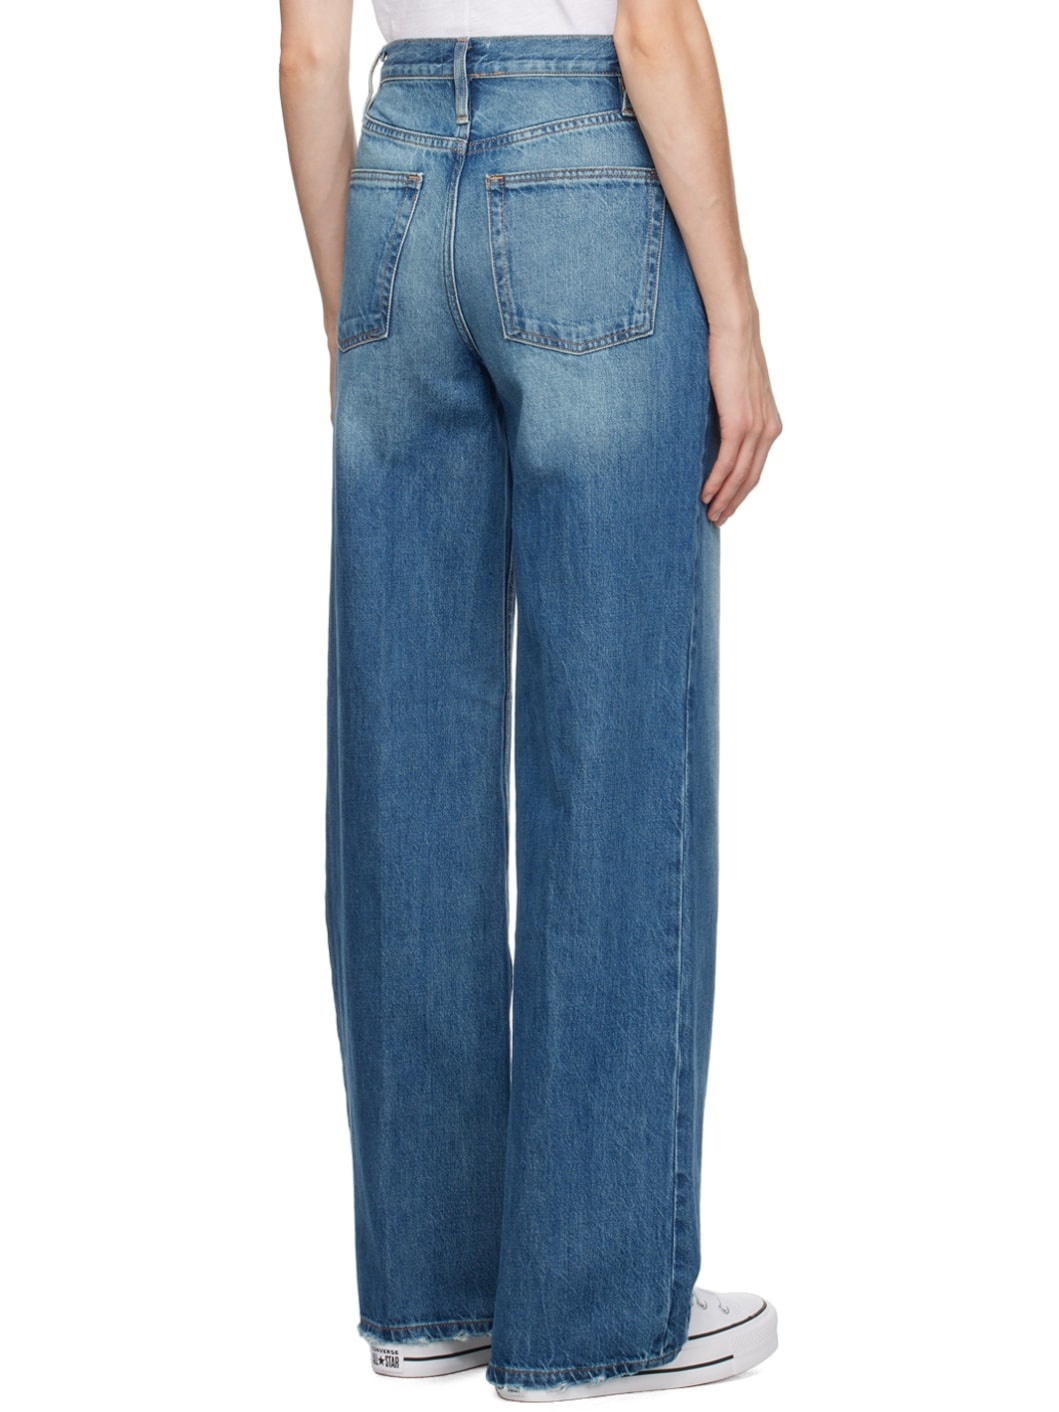 Blue 'The 1978' Jeans - 3